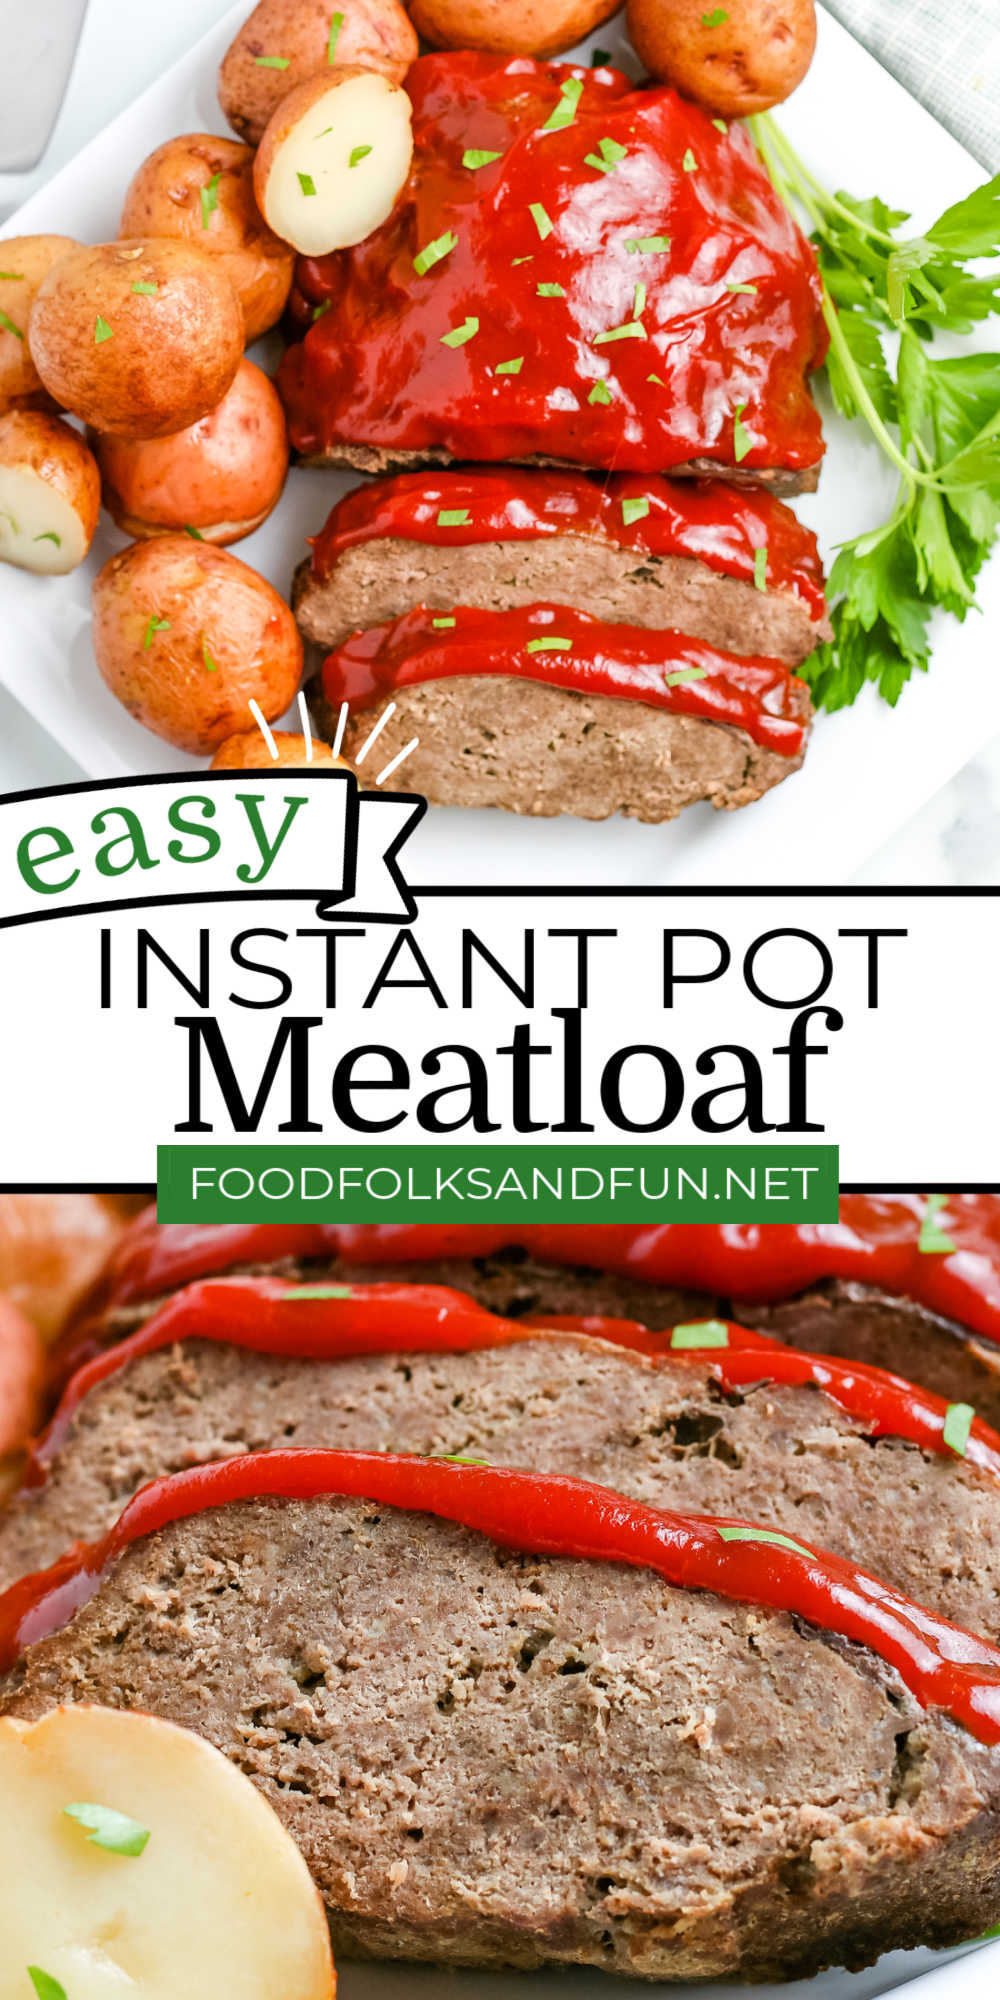 This Instant Pot Meatloaf recipe is everything you love about the classic but so much better! It’s easy to make, full of flavor, and the potatoes cook right along with it! via @foodfolksandfun